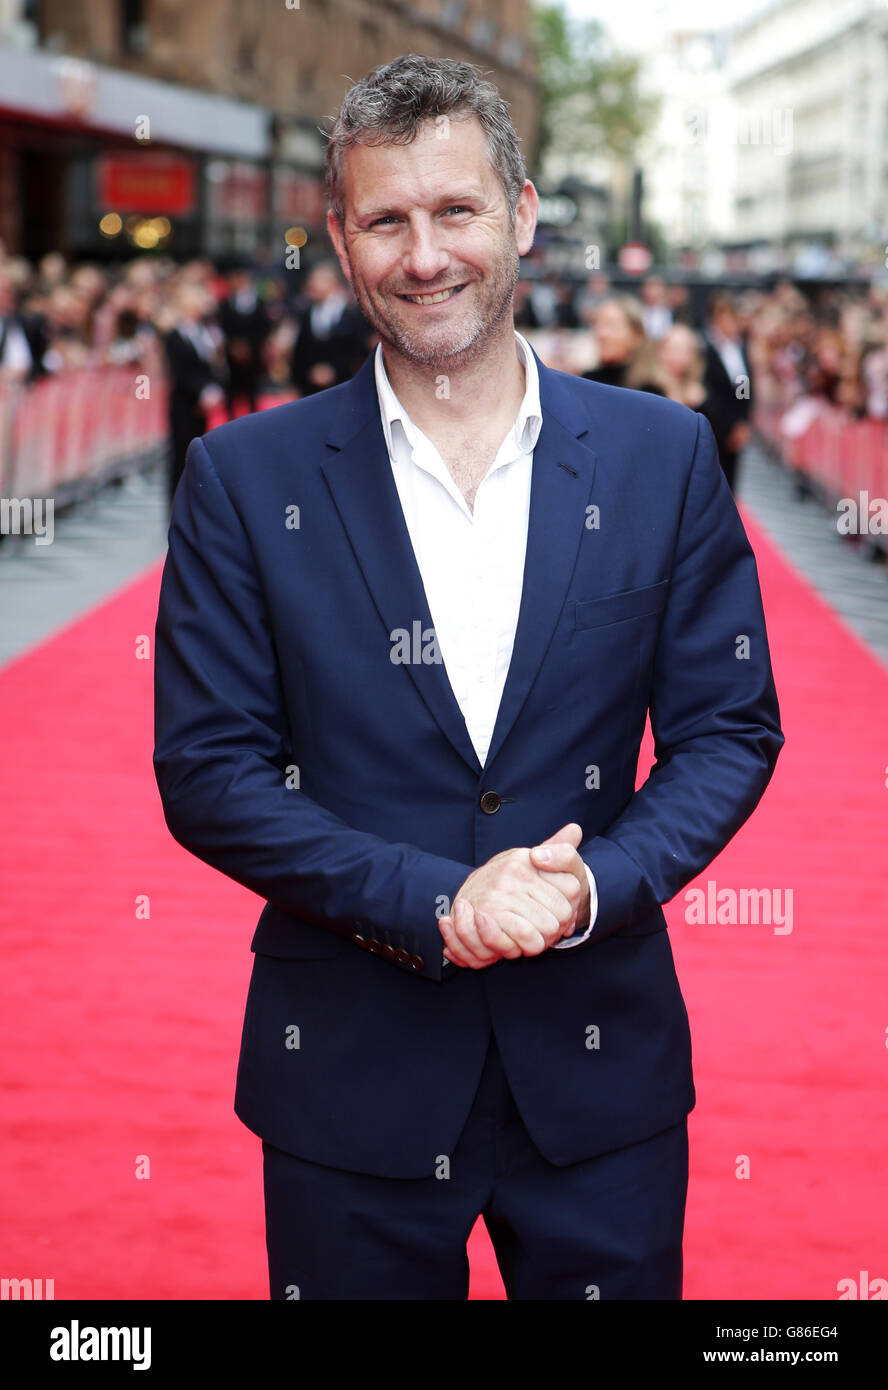 Adam Hills attending The Bad Education Movie World Premiere, held at Vue West End, Cranbourn Street, London. PRESS ASSOCIATION Photo. Picture date: Thursday August 20, 2015. Photo credit should read: Daniel Leal-Olivas/PA Wire Stock Photo